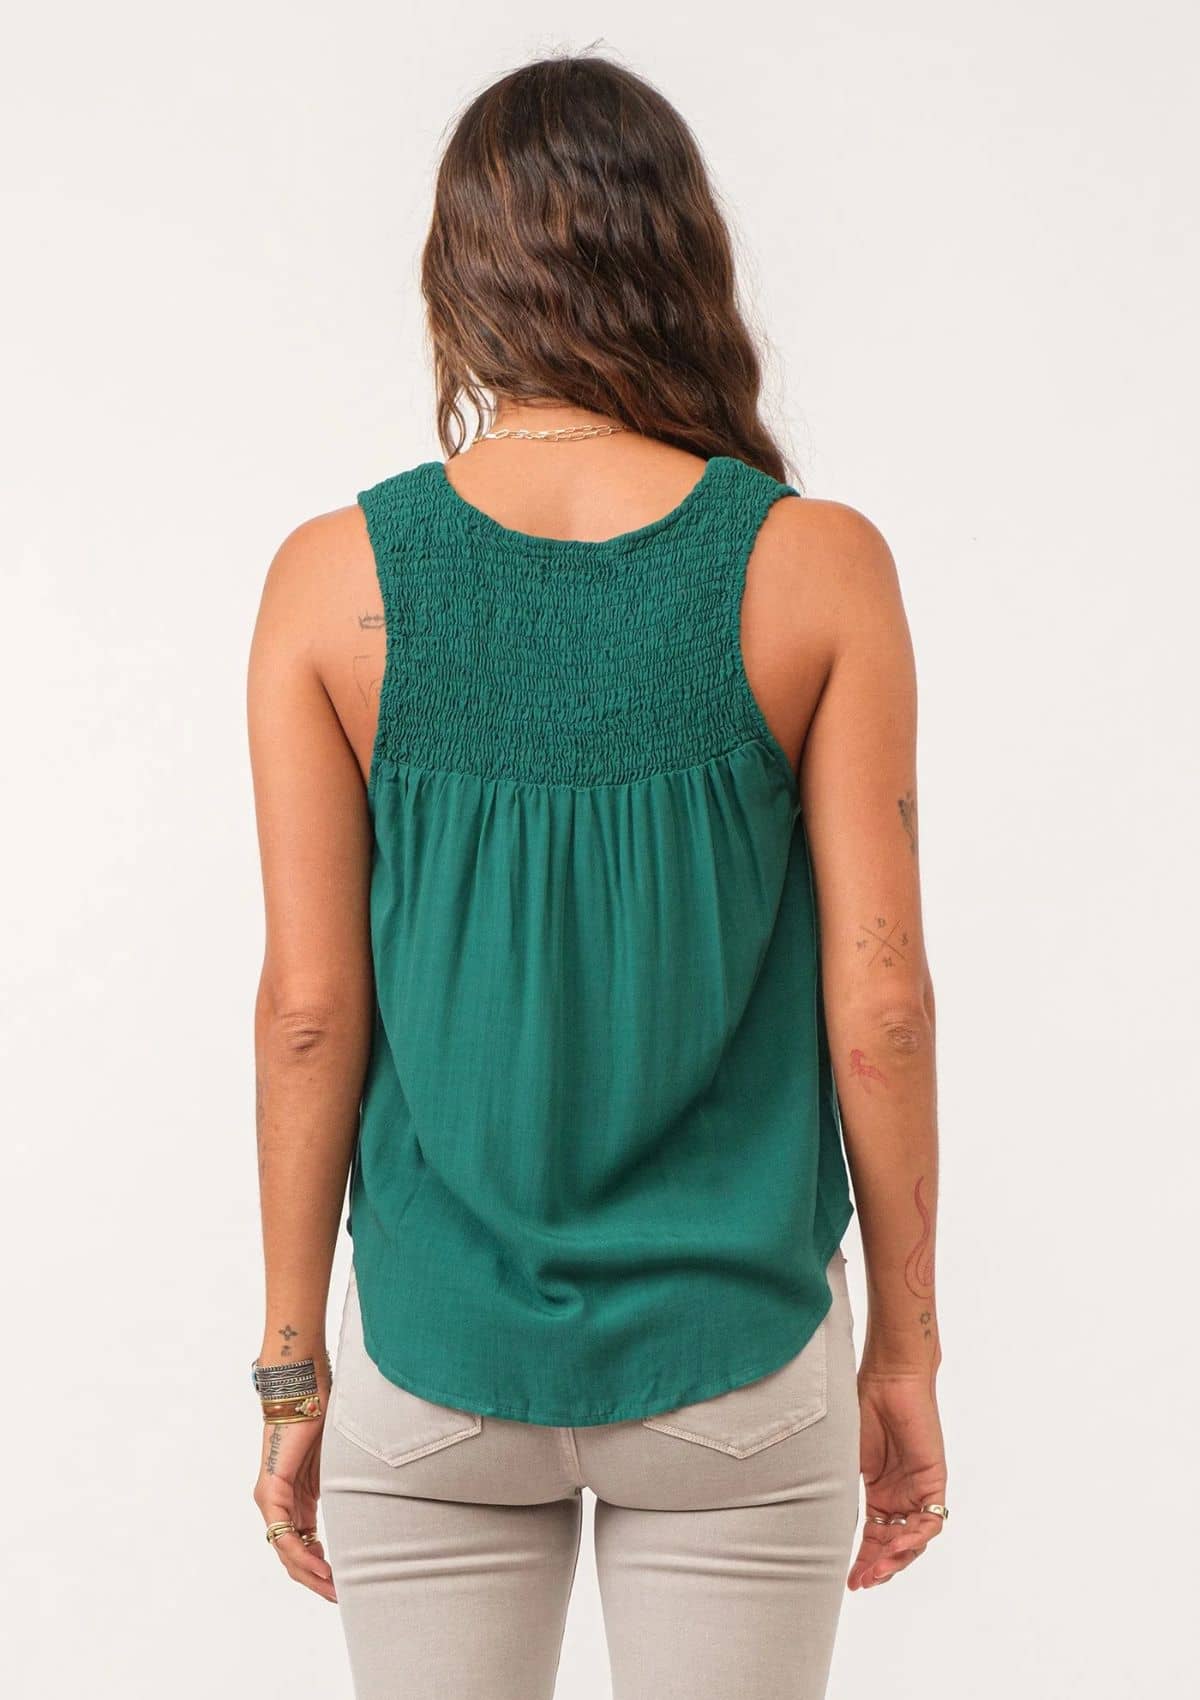 Smocked back top. Paired with grey jeans.